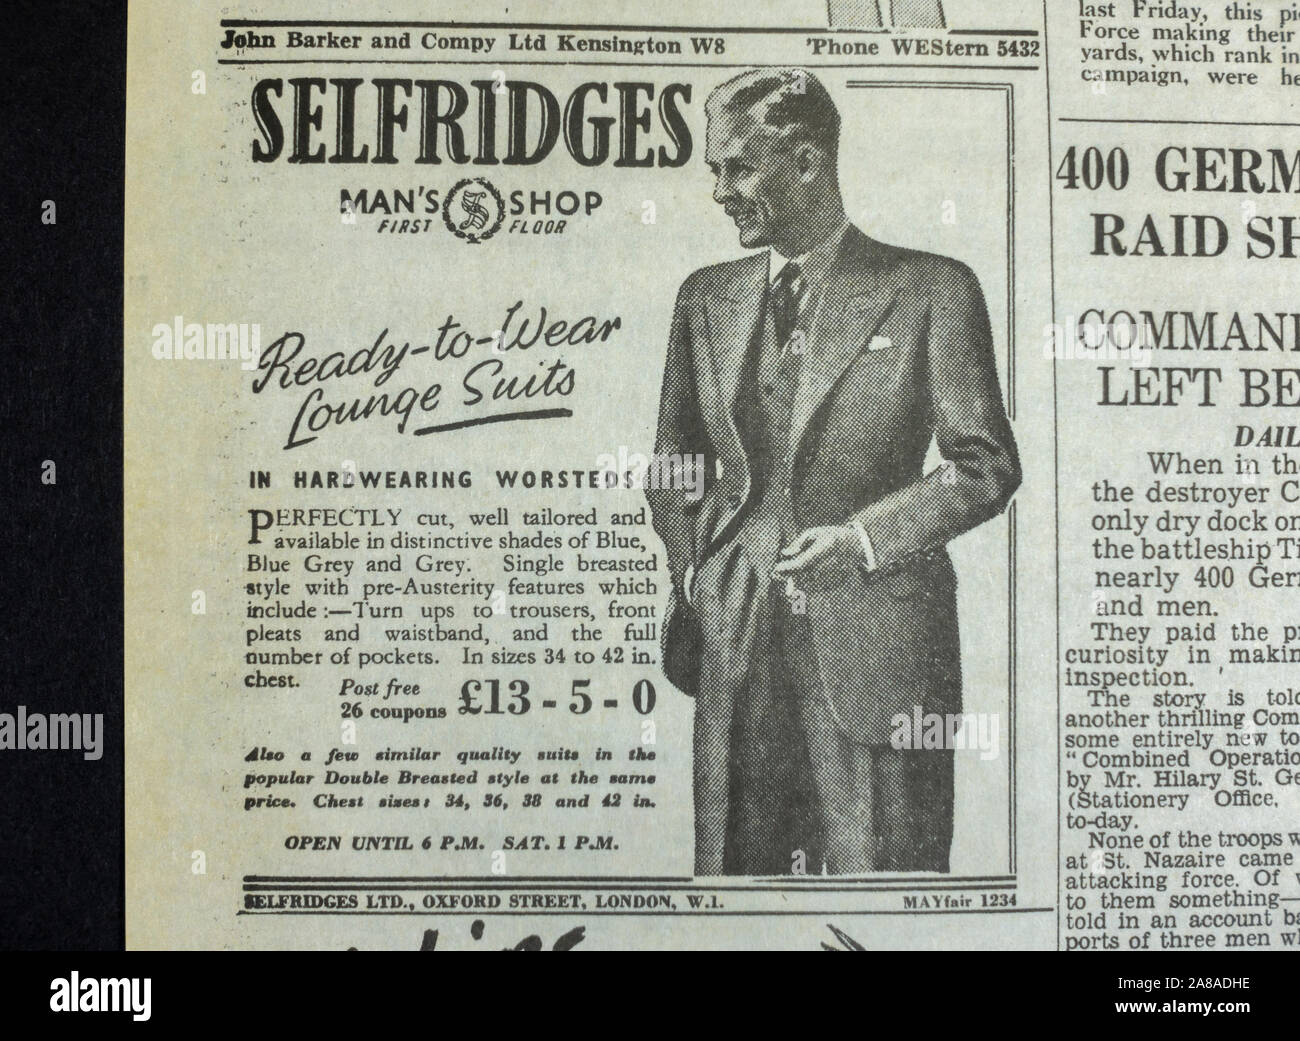 Advert for Selfridges ready-to-wear lounge suits in The Daily Telegraph (replica), 18th May 1943, the day after the Dam Busters raid. Stock Photo